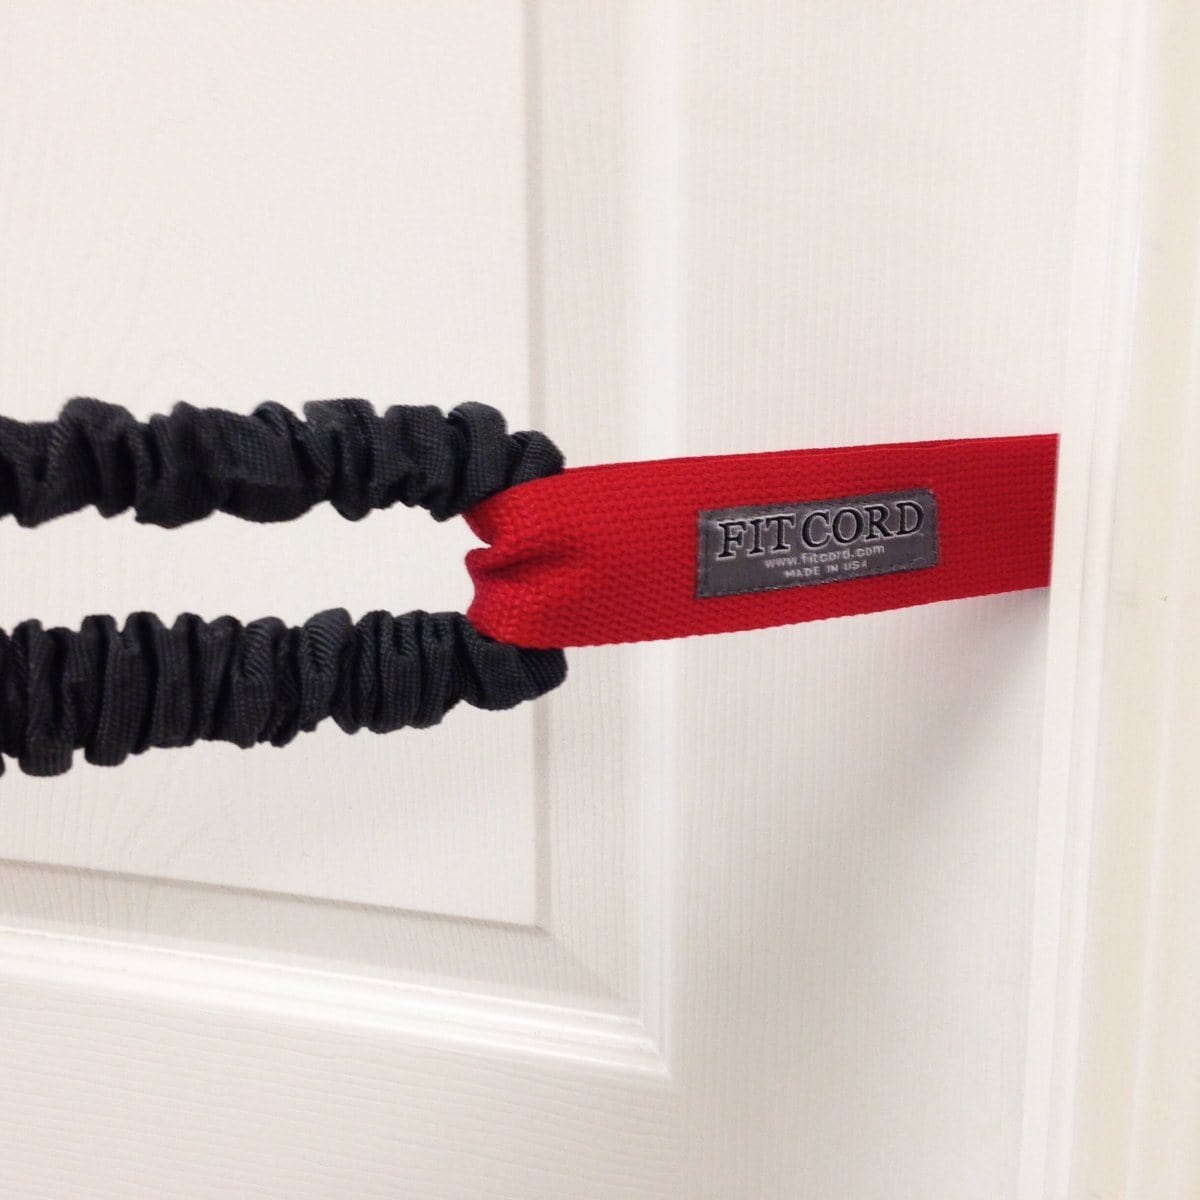 Door Anchor best resistance bands made in USA and covered for safety - FitCord Resistance Bands